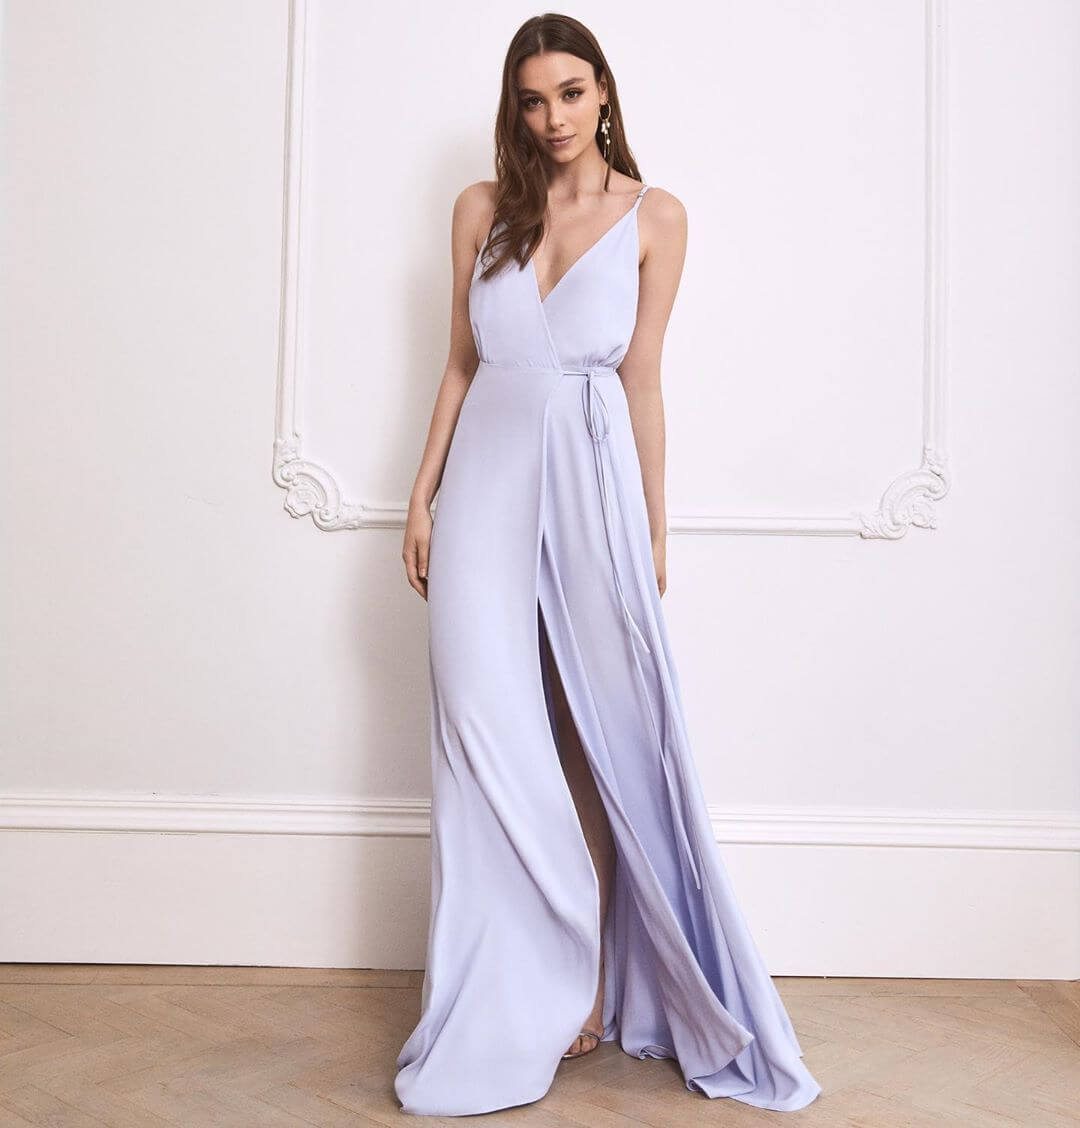 Lilac Maxi Dress For The Bridesmaids Pastel Color Outfit